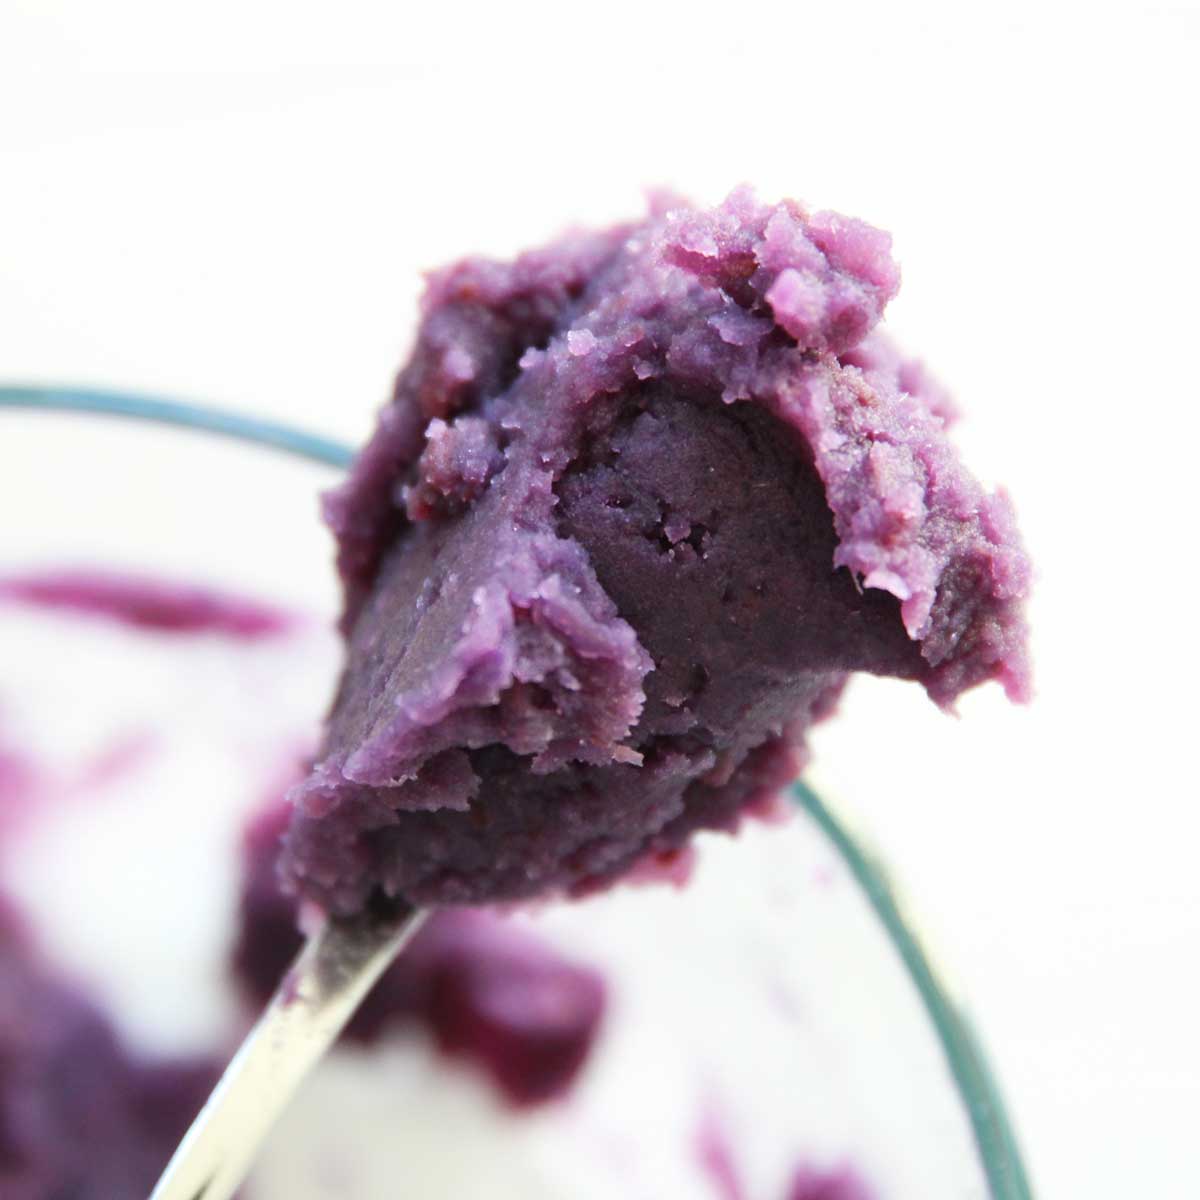 Purple Sweet Potato Filling Recipe for Mochi, Mooncakes and Steamed Buns - Sweet Taro Paste